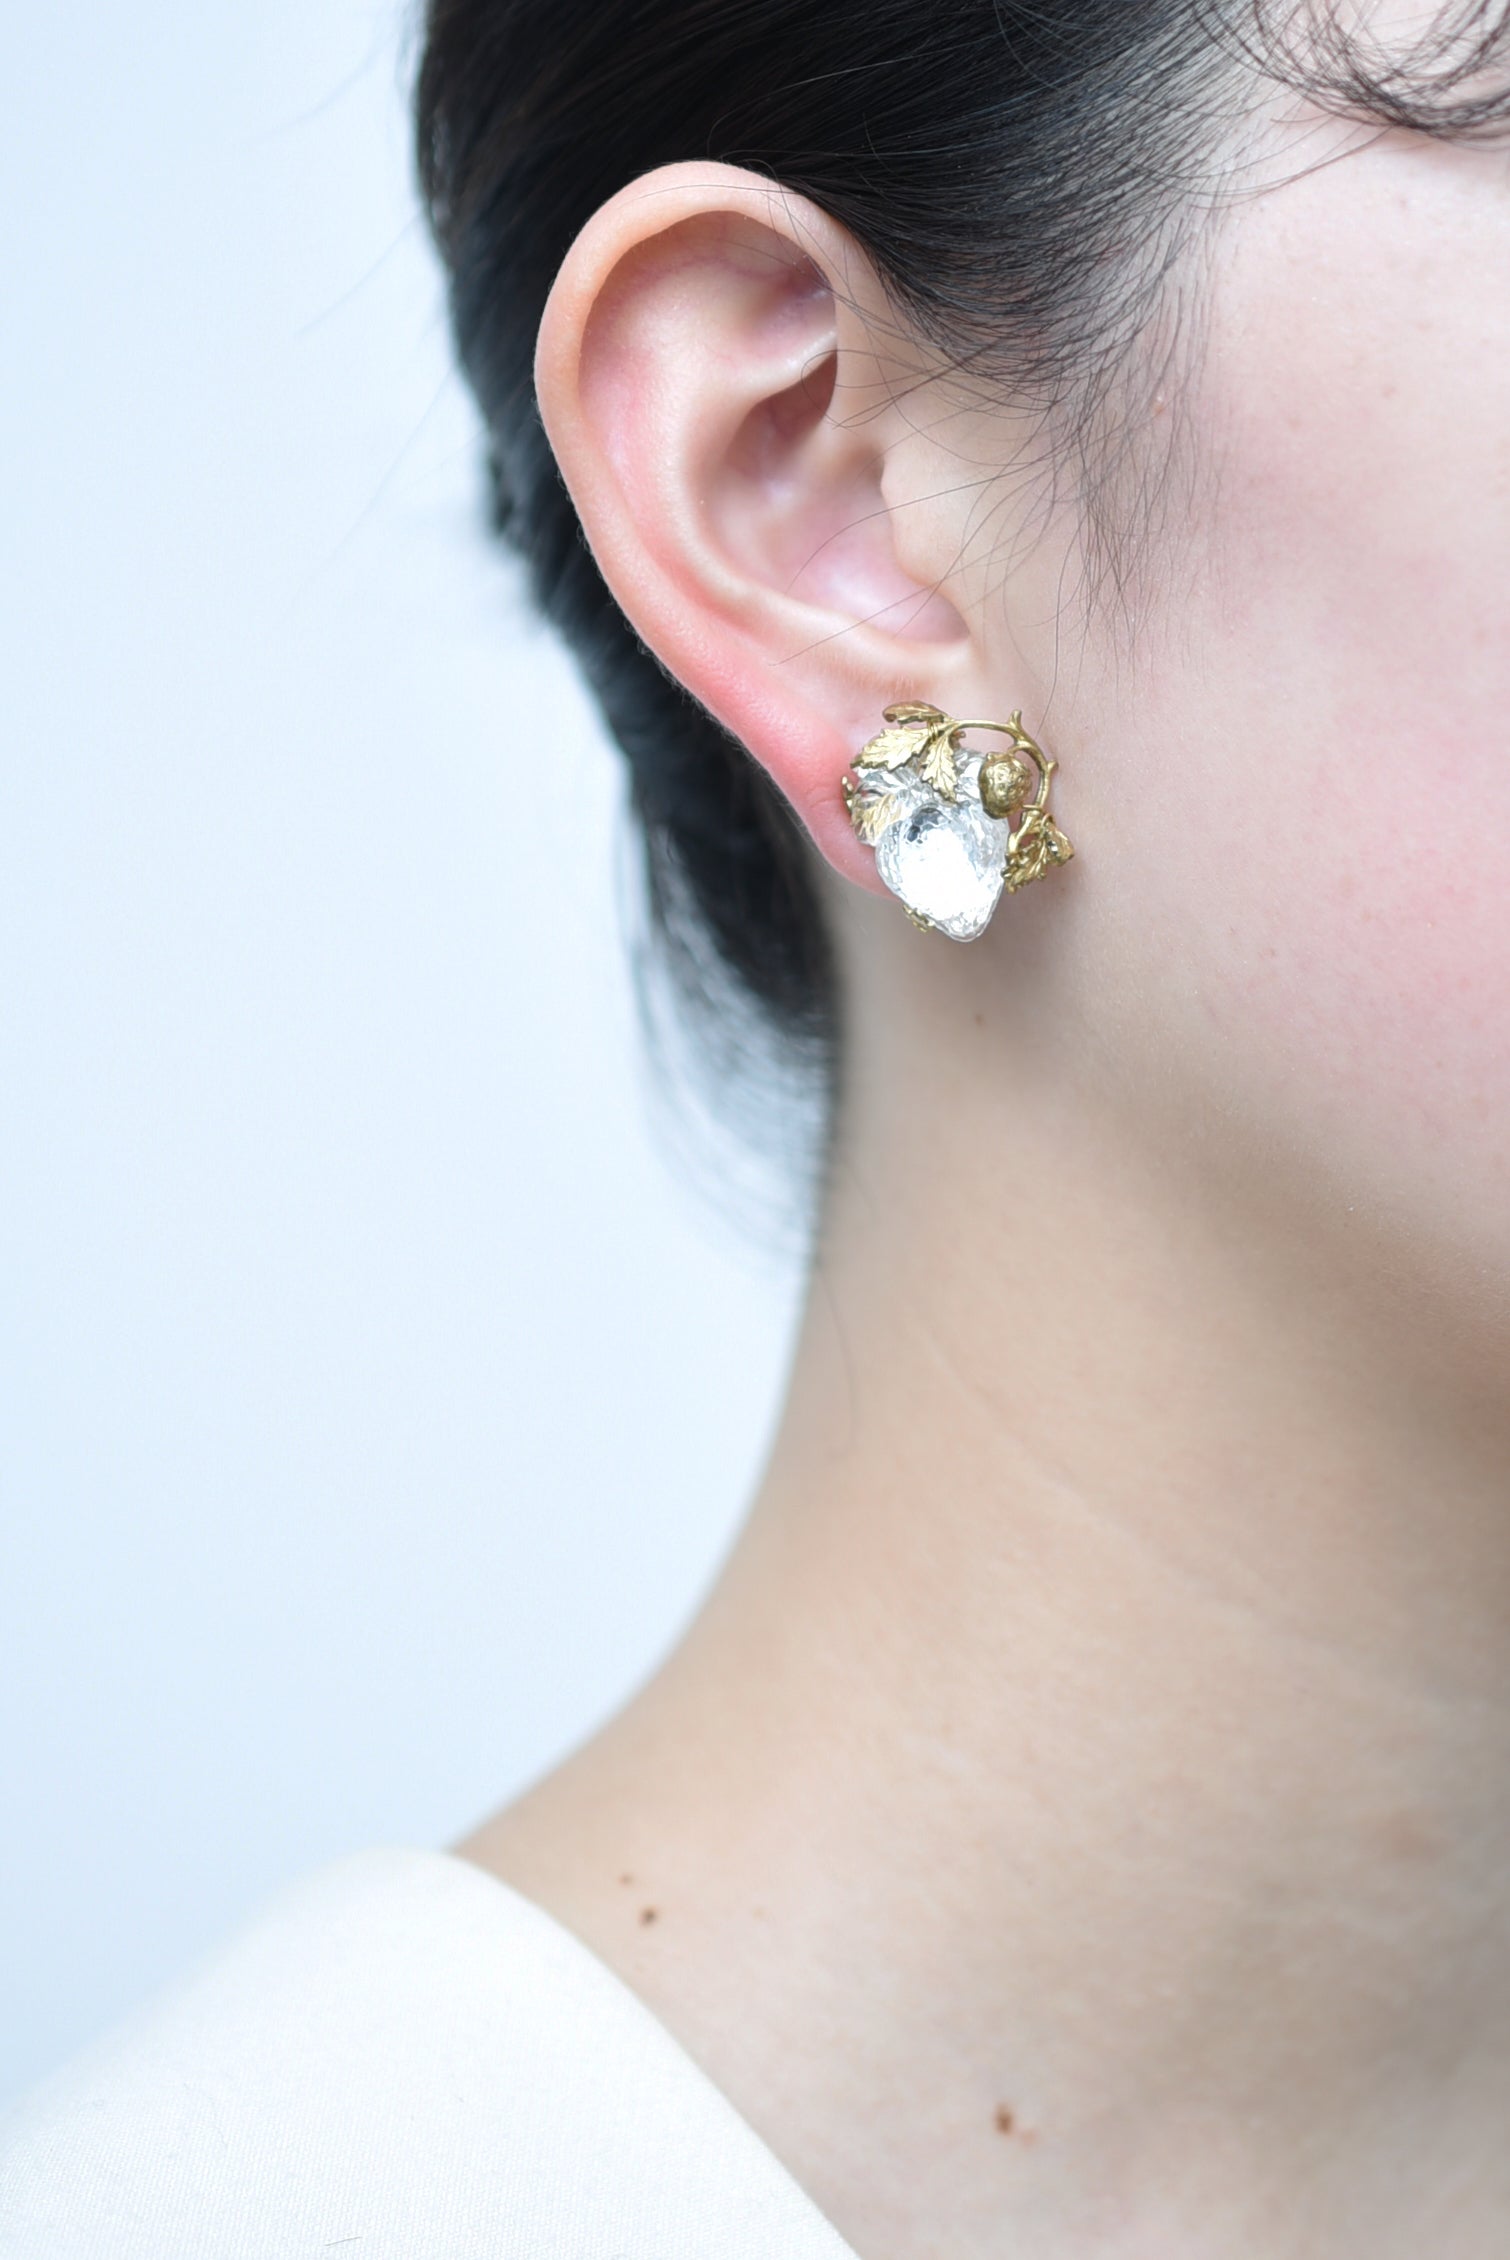 strawberry earring – monshiro official web site